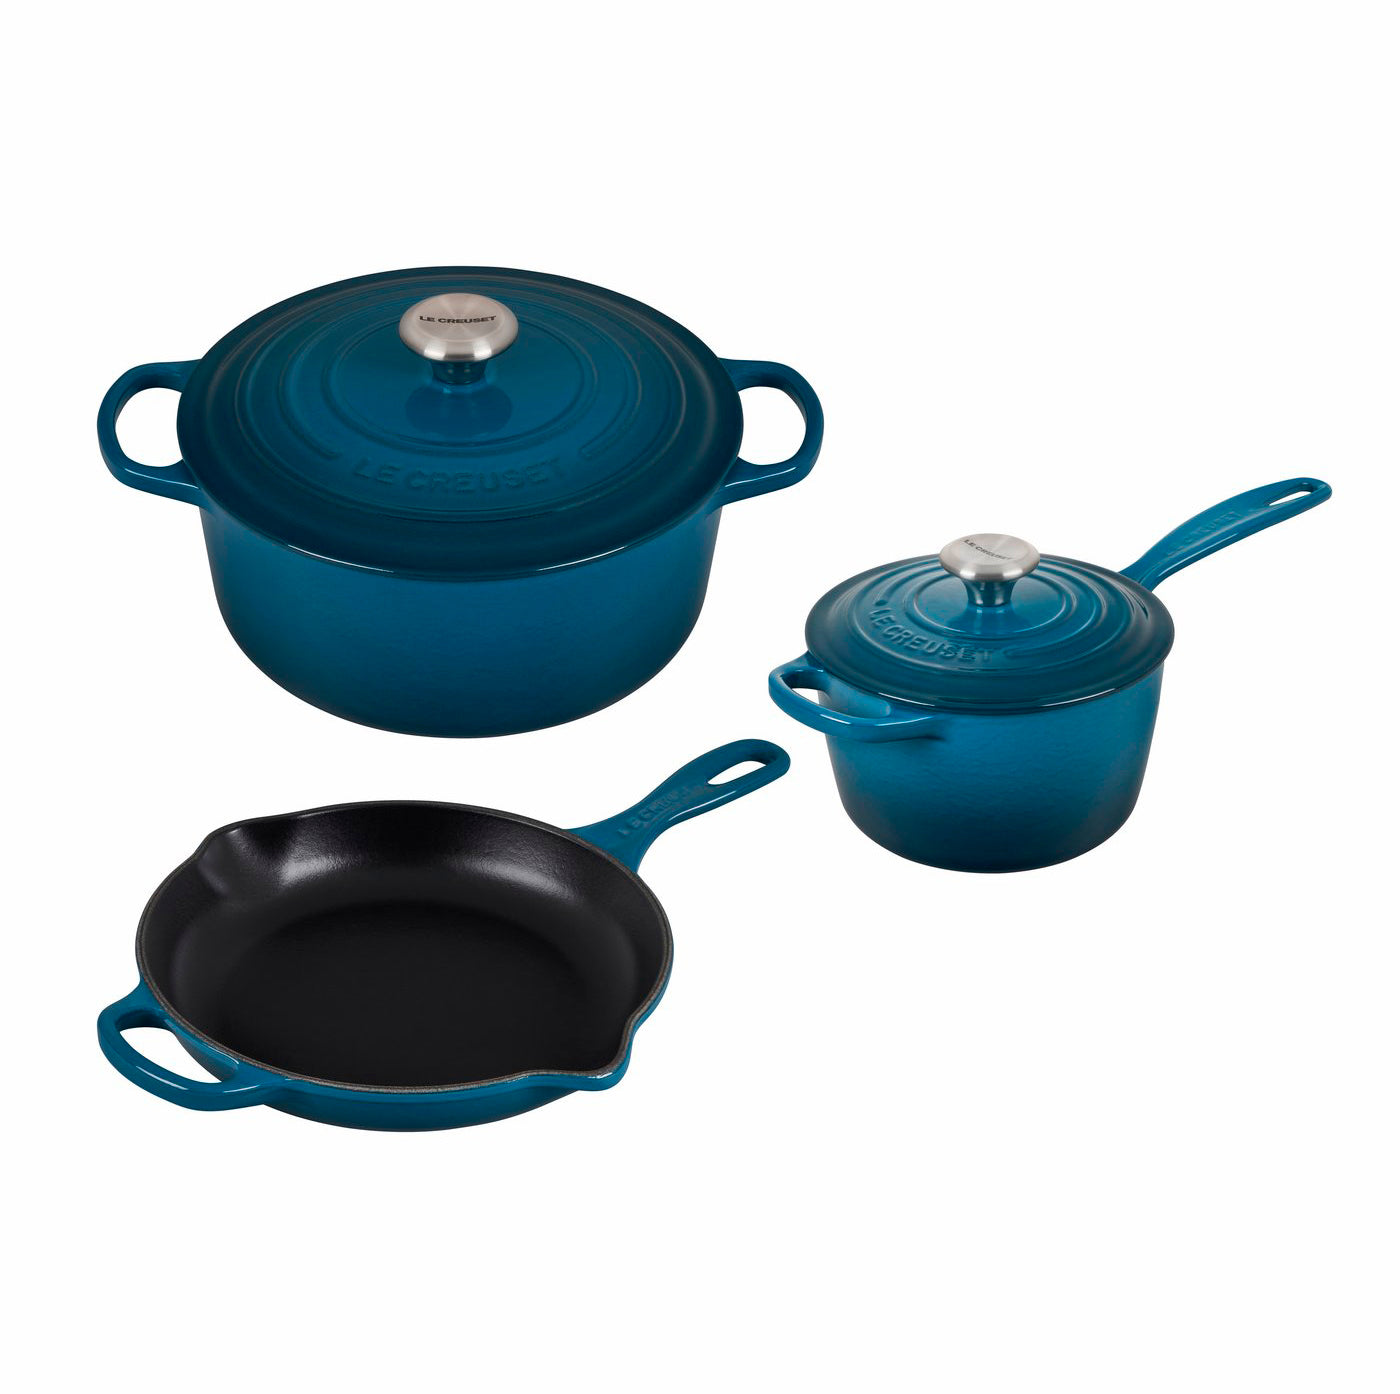 5.5 Qt Teal French Oven - The Peppermill